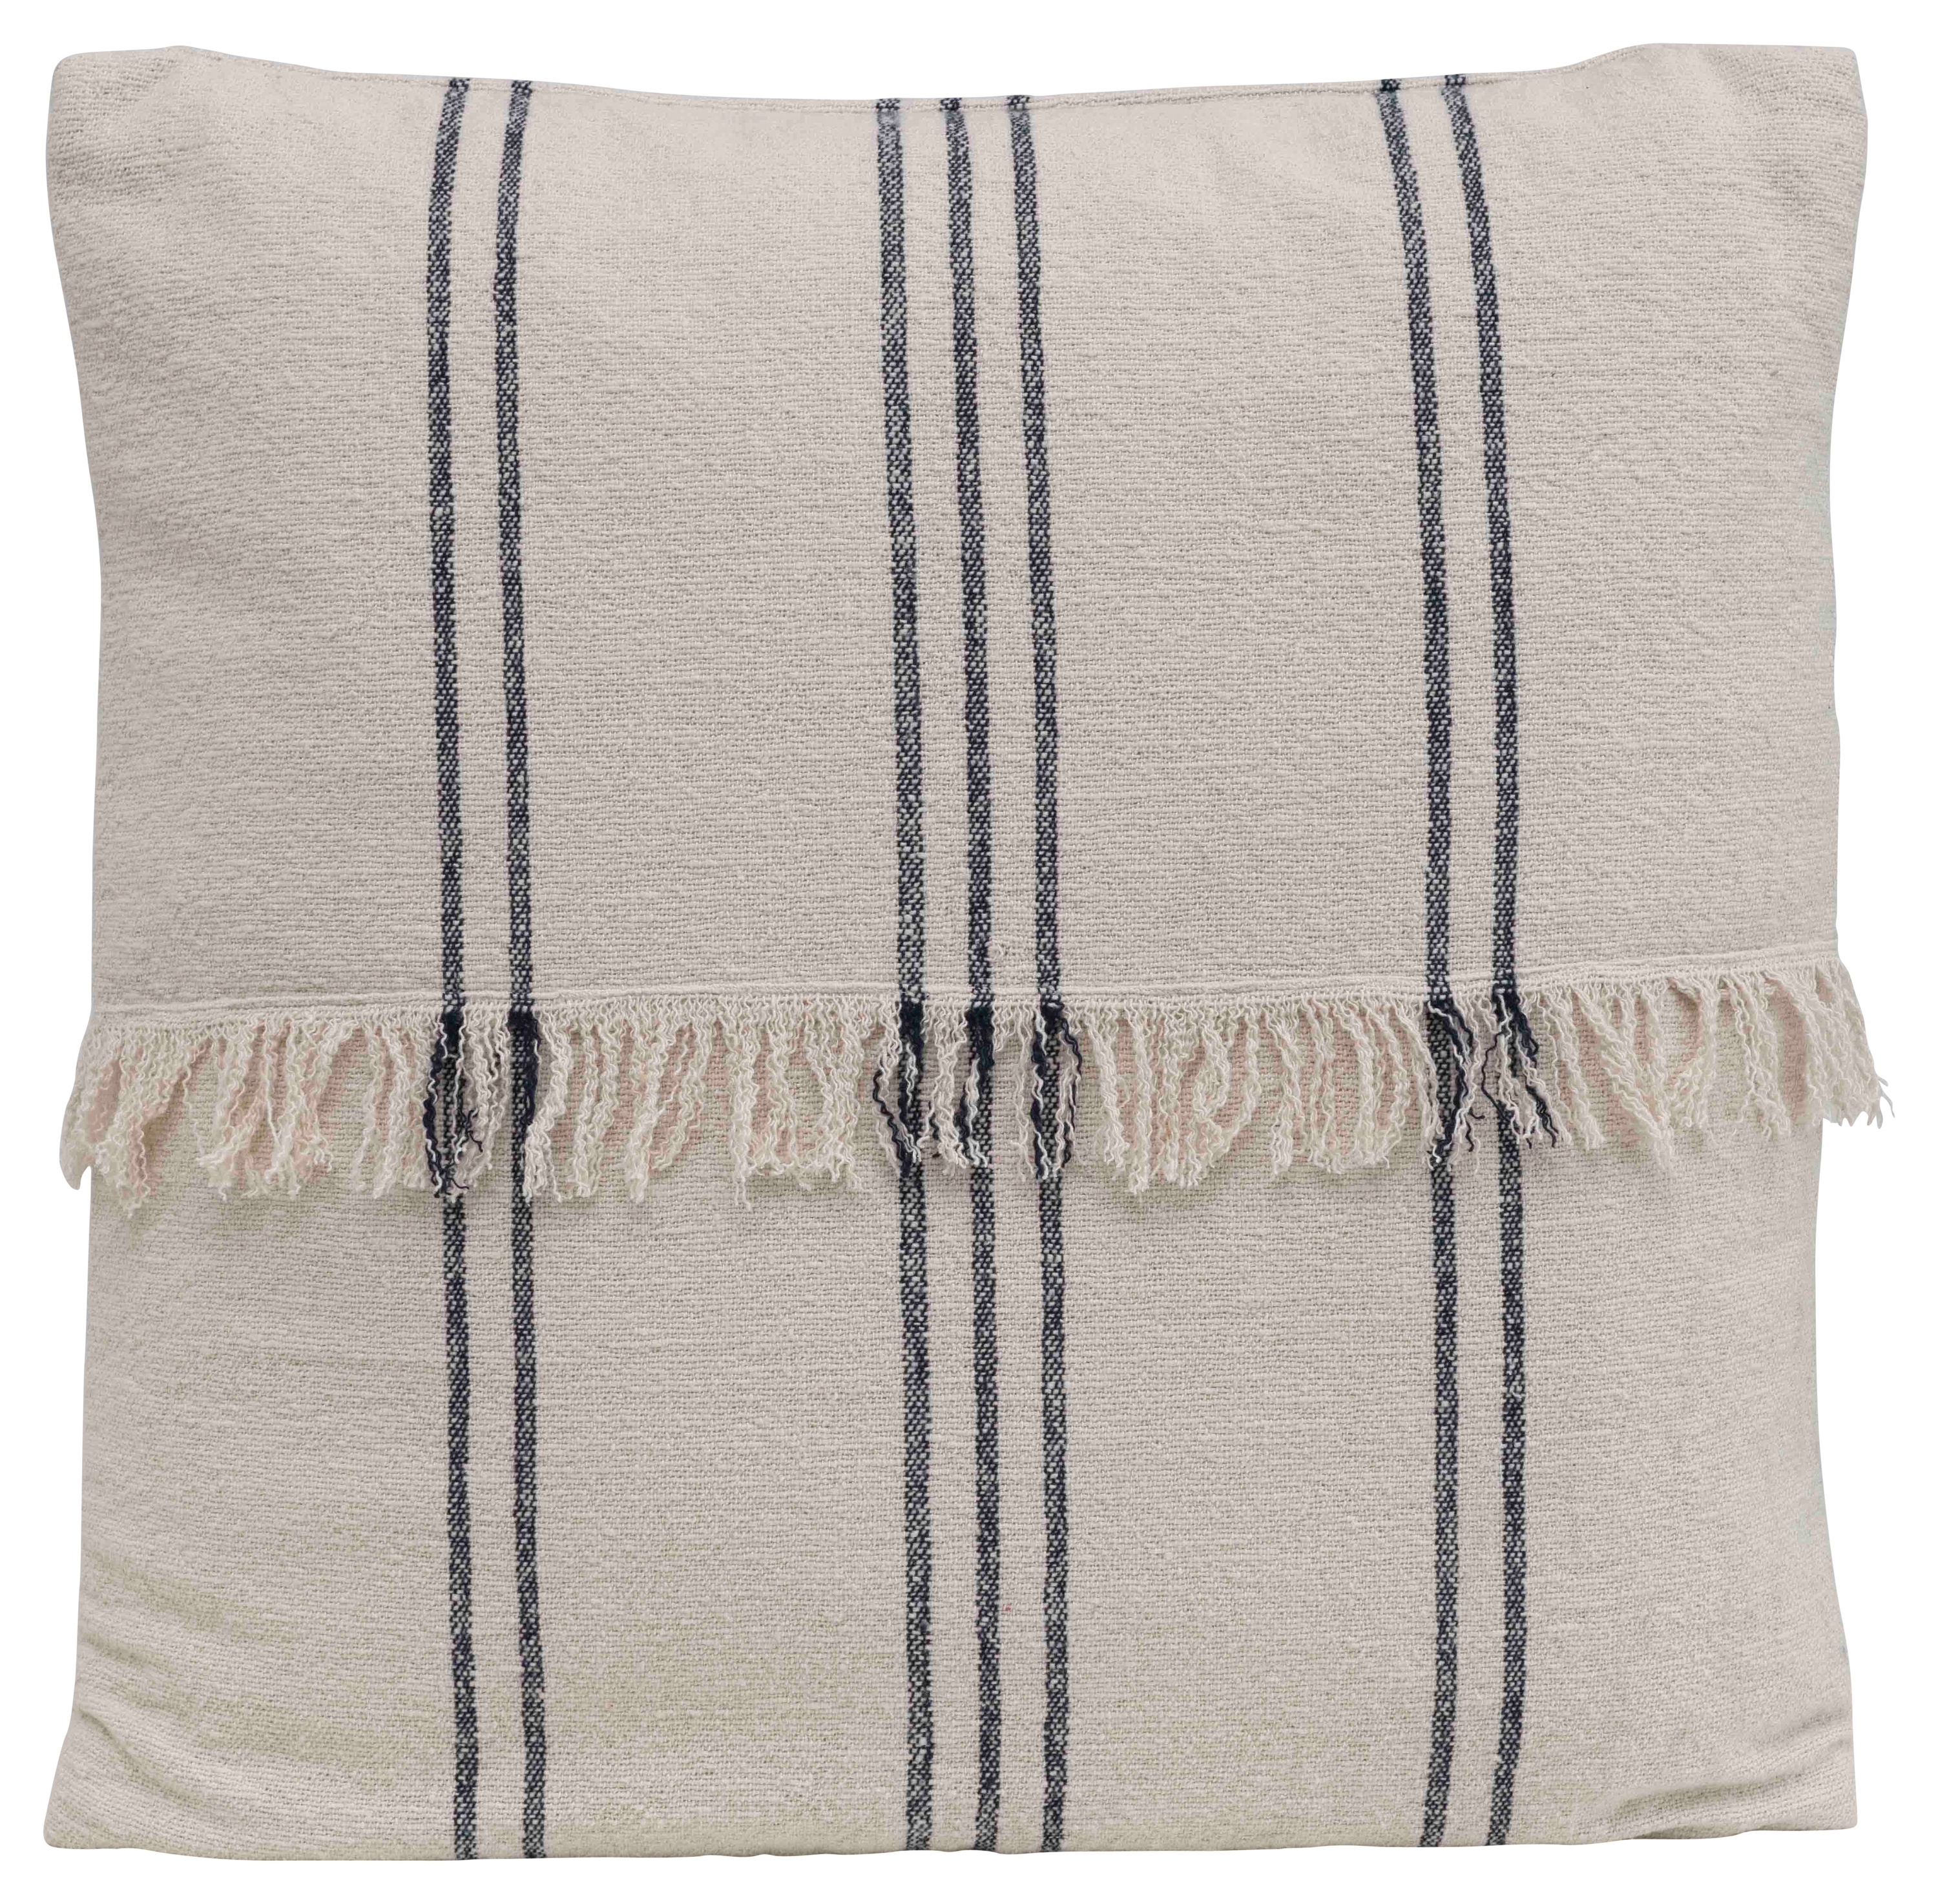 Square Striped Cotton Mudcloth Pillow with Fringe Center - Image 0